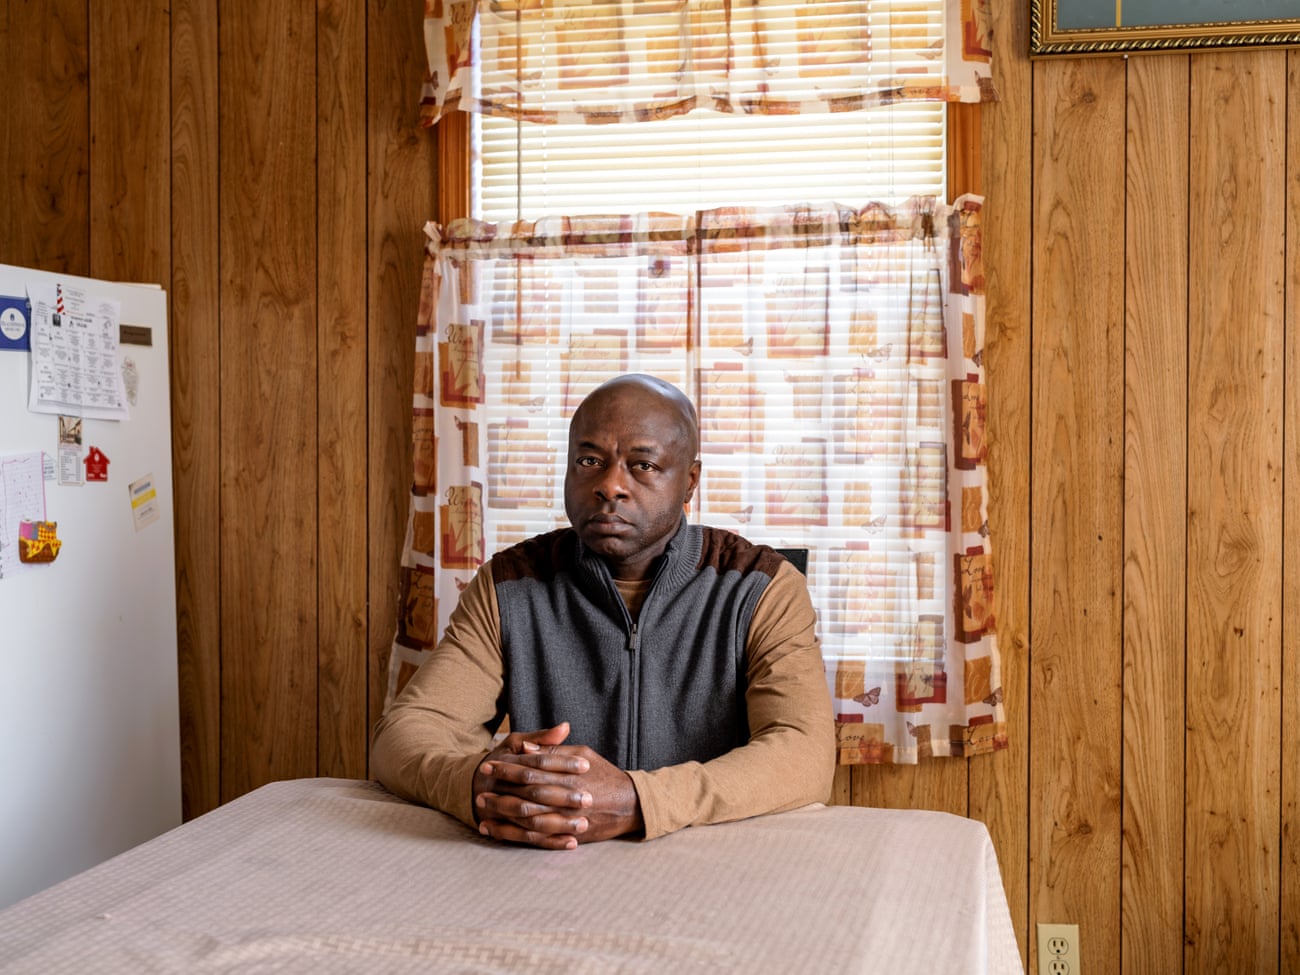 Alfonzo Tucker photographed at his home in Tuscaloosa. Photograph: Johnathon Kelso/The Guardian